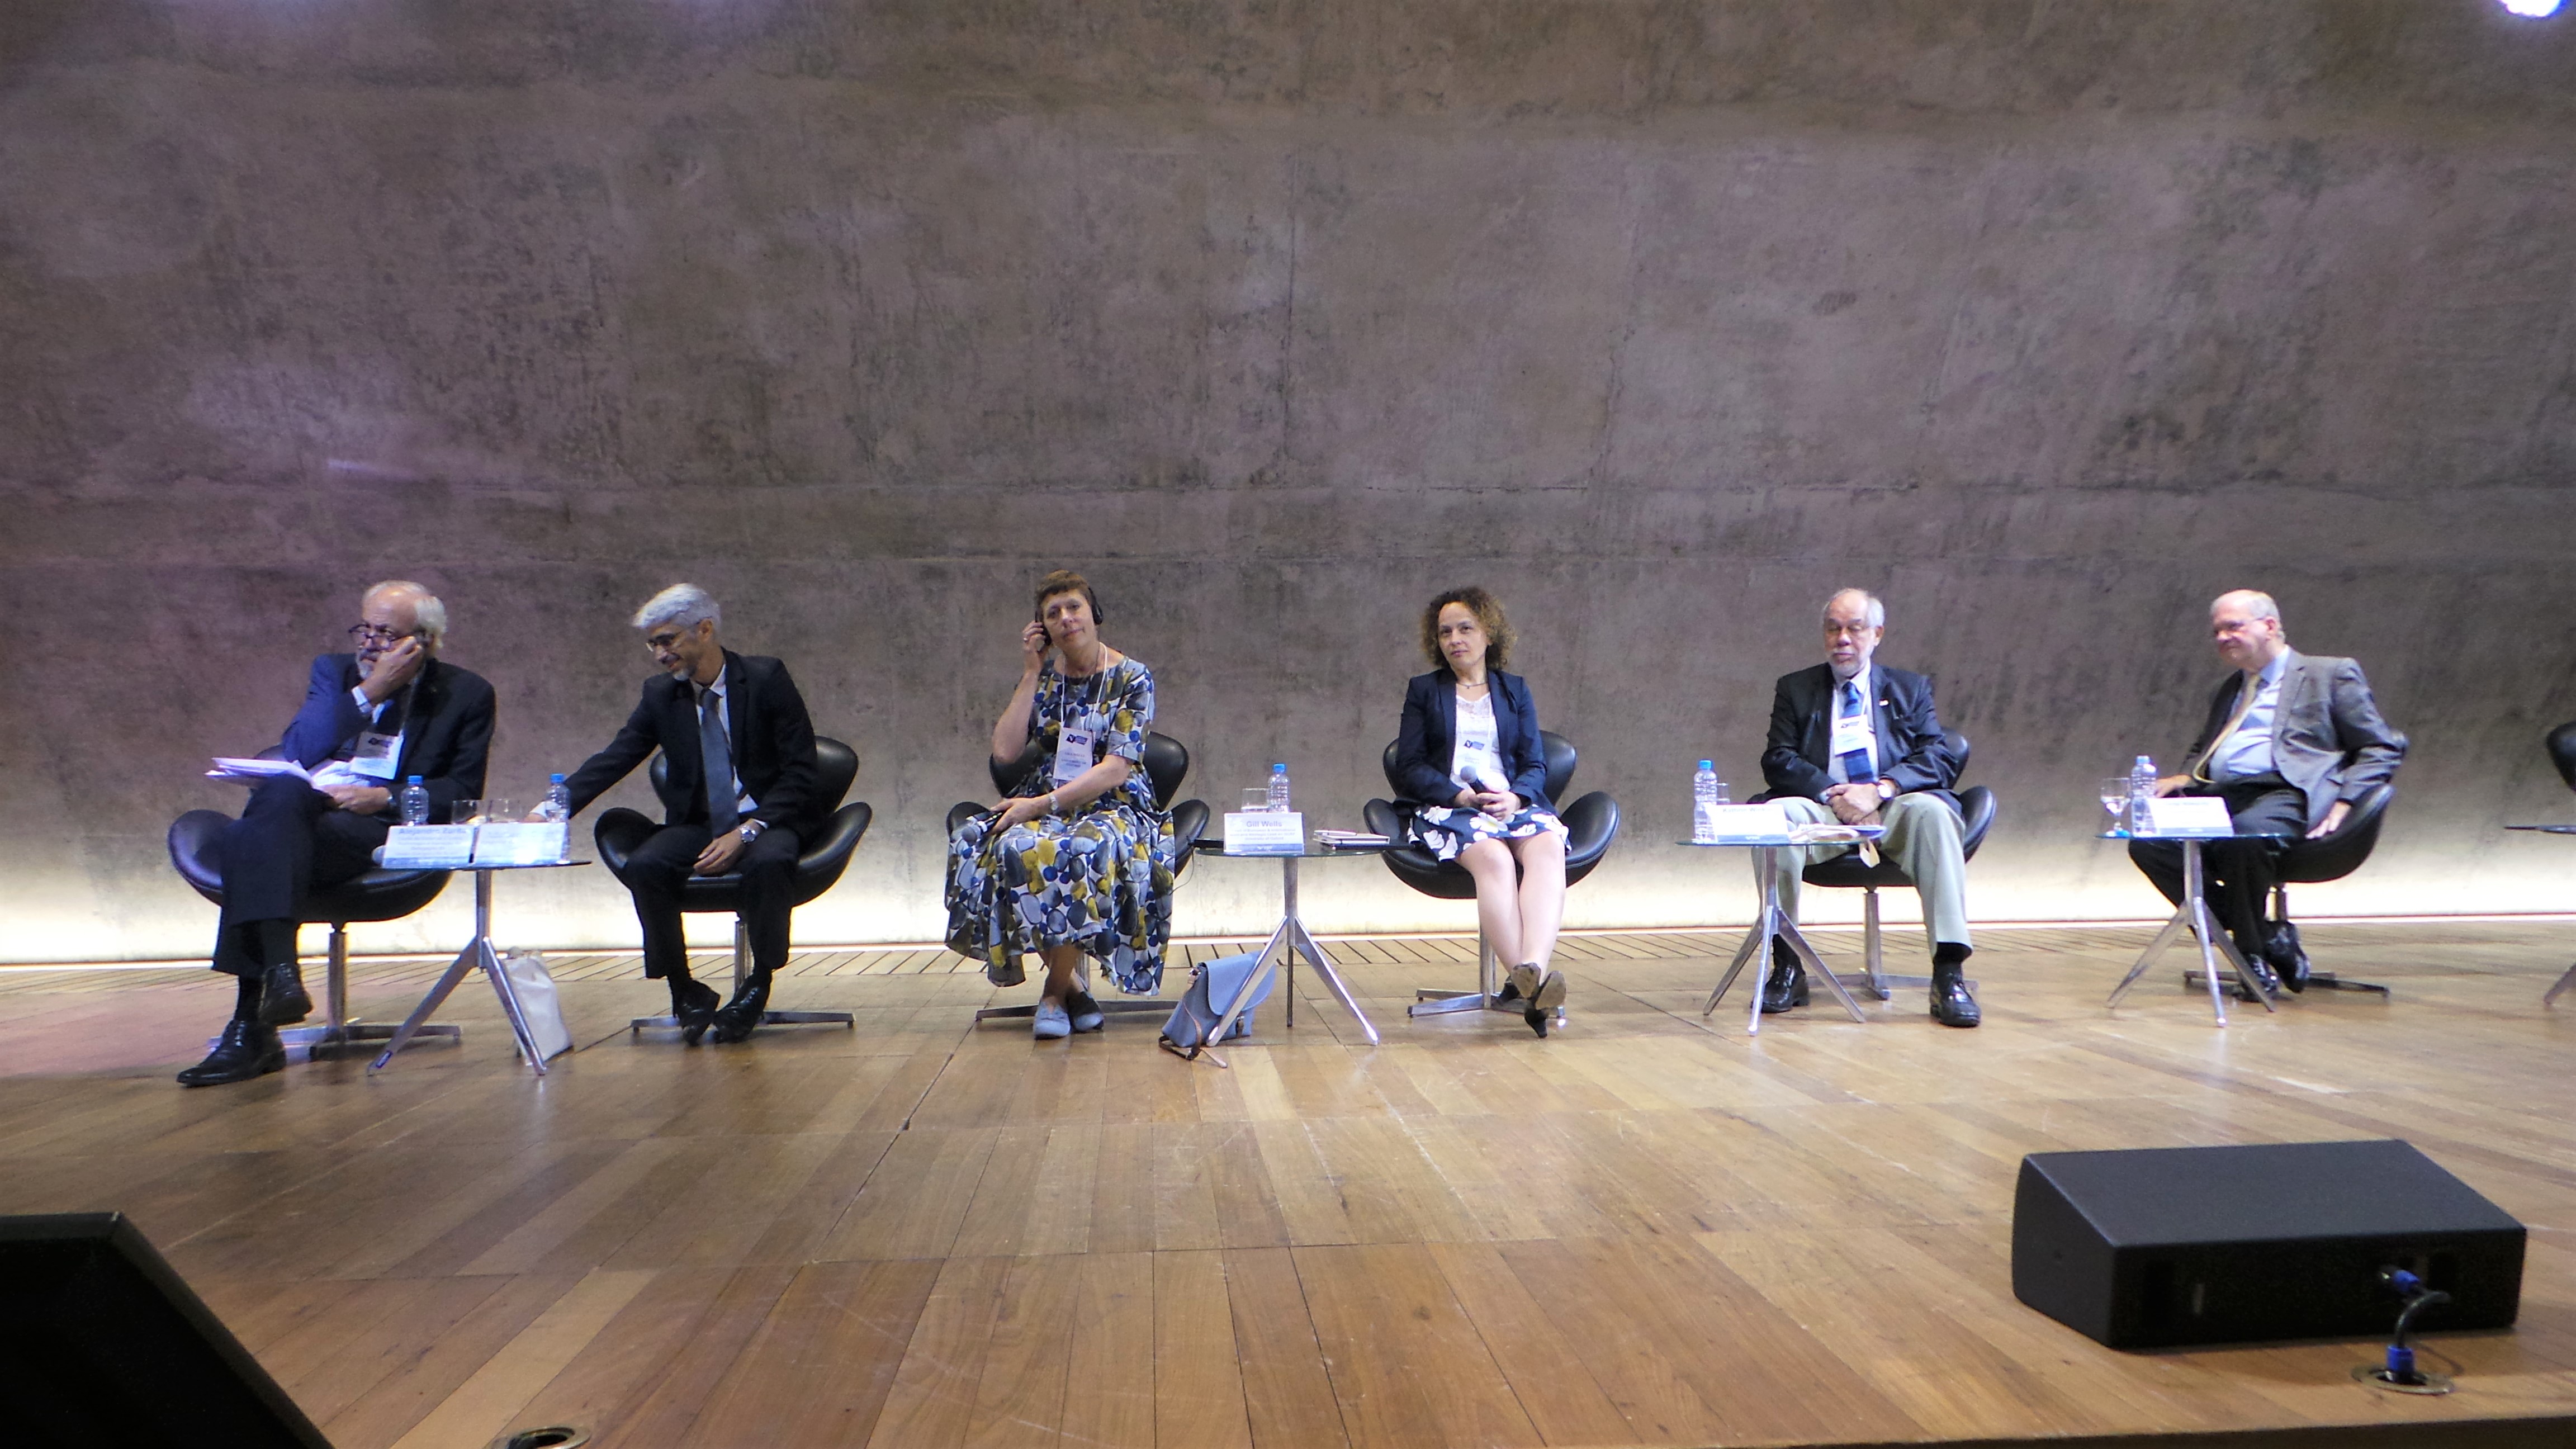 Speakers of the panel on the topic of "Assessing and Measuring Scientific Impact in Society, the Economy, Culture and the Environment"